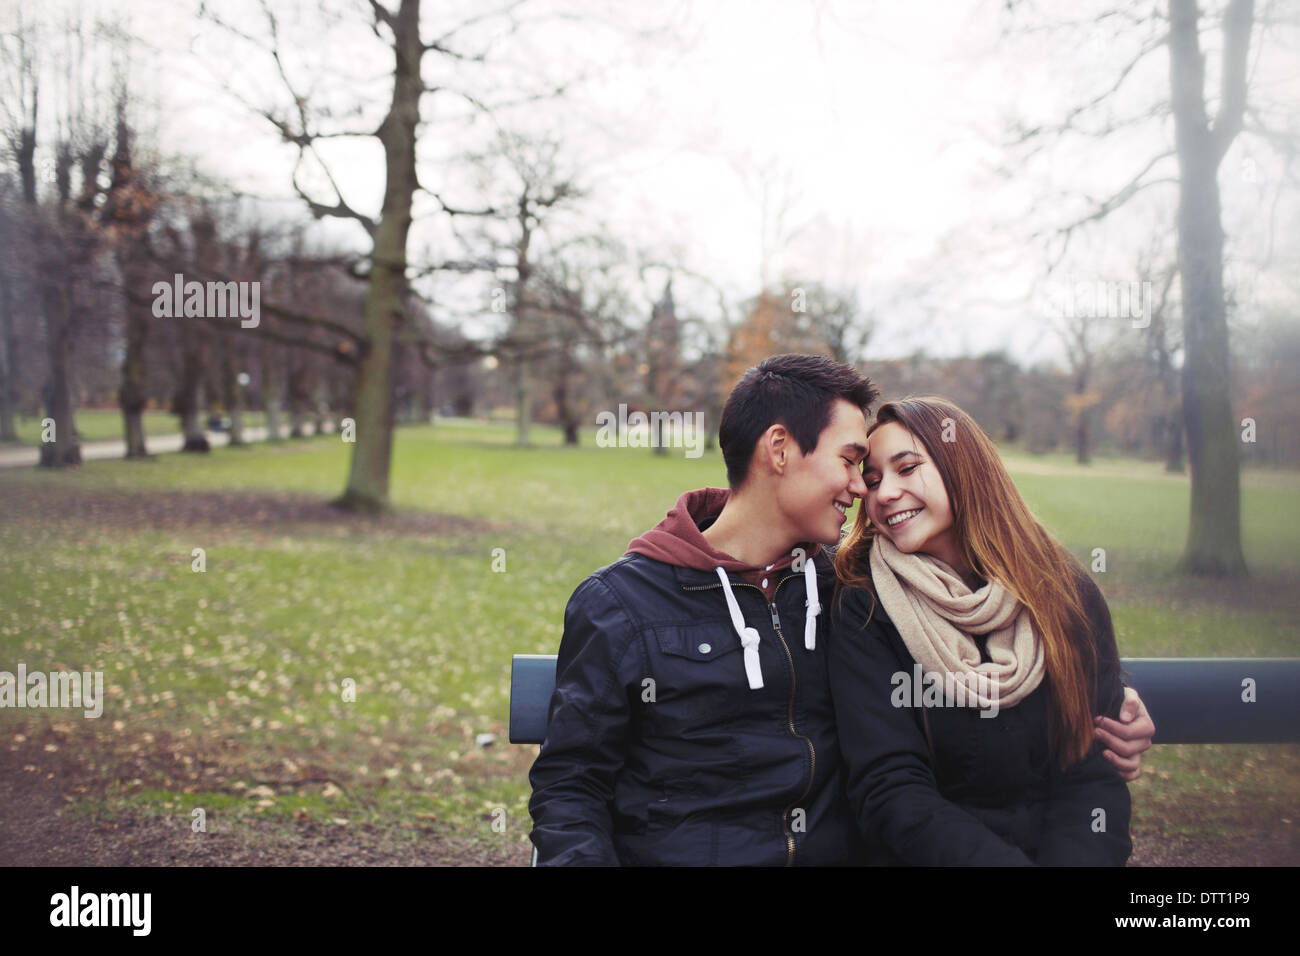 Romantic young couple sitting on a park bench outdoors in winter. Mixed ...